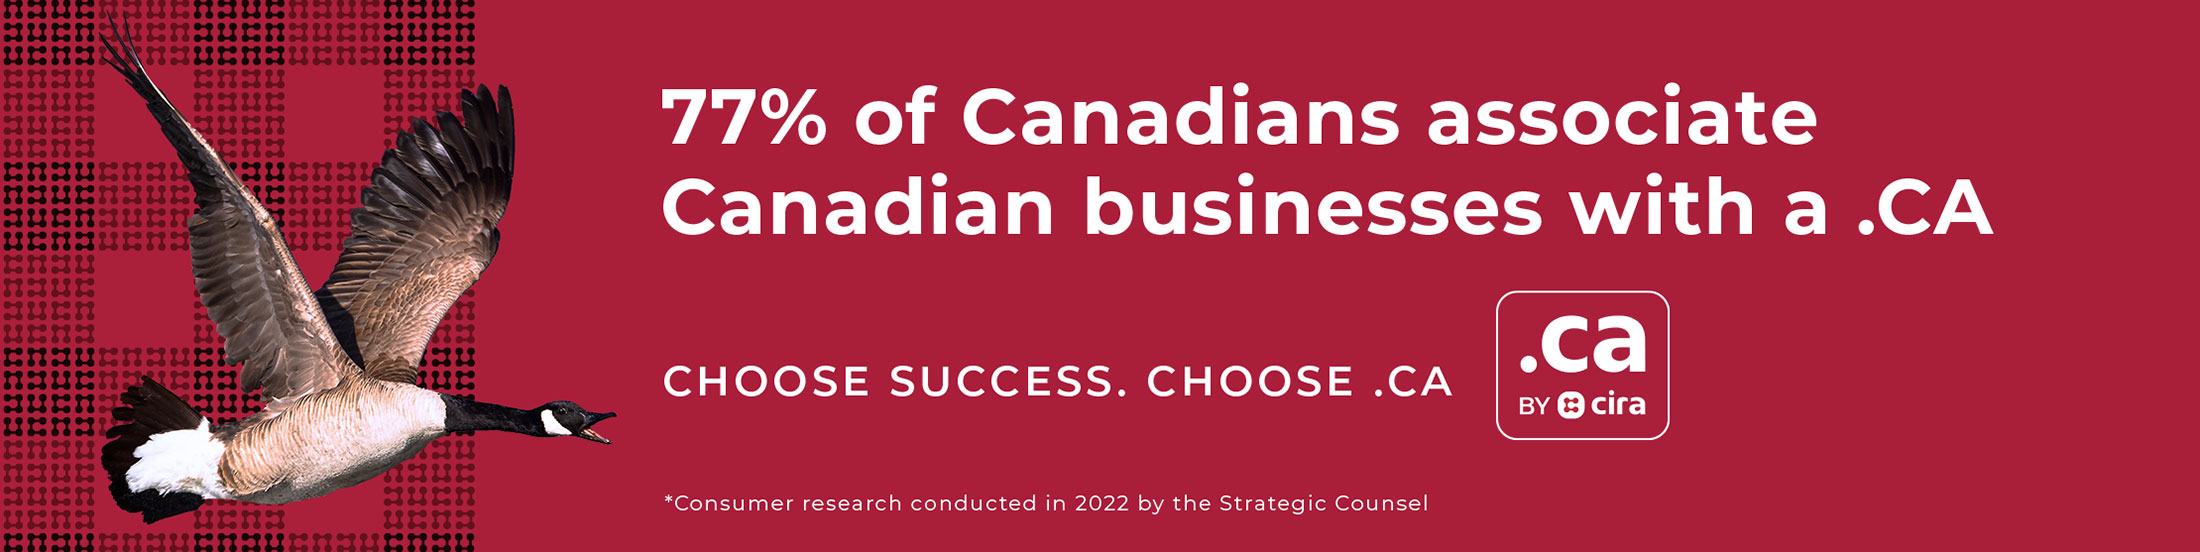 77% of Canadians associate Canadian businesses with a .CA